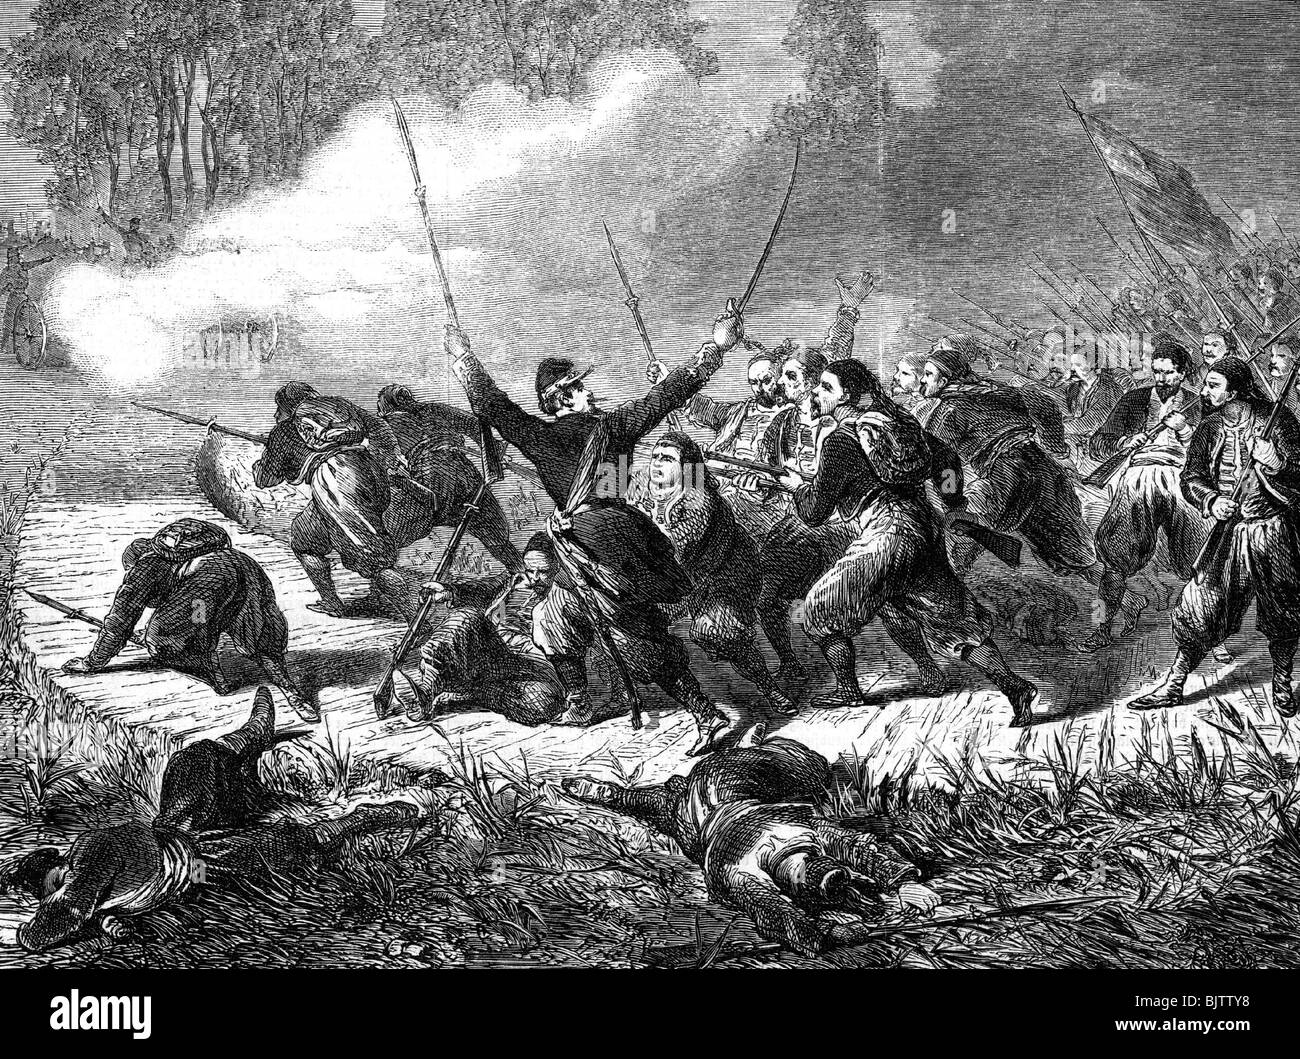 geography / travel, USA, American Civil War 1861 - 1865, Battle of  Roanoke Island, North Carolina, 7.- 8.2.1862, 9th New York (Hawkins' Zouaves) storming a Confederate battery, wood engraving, 1862, Burnside Expedition, 19th century, historic, historical, 1860s, battle, battles, infantry, fight, fighting, combat, battlefield, soldiers, North America, Union, Federal, people, Stock Photo